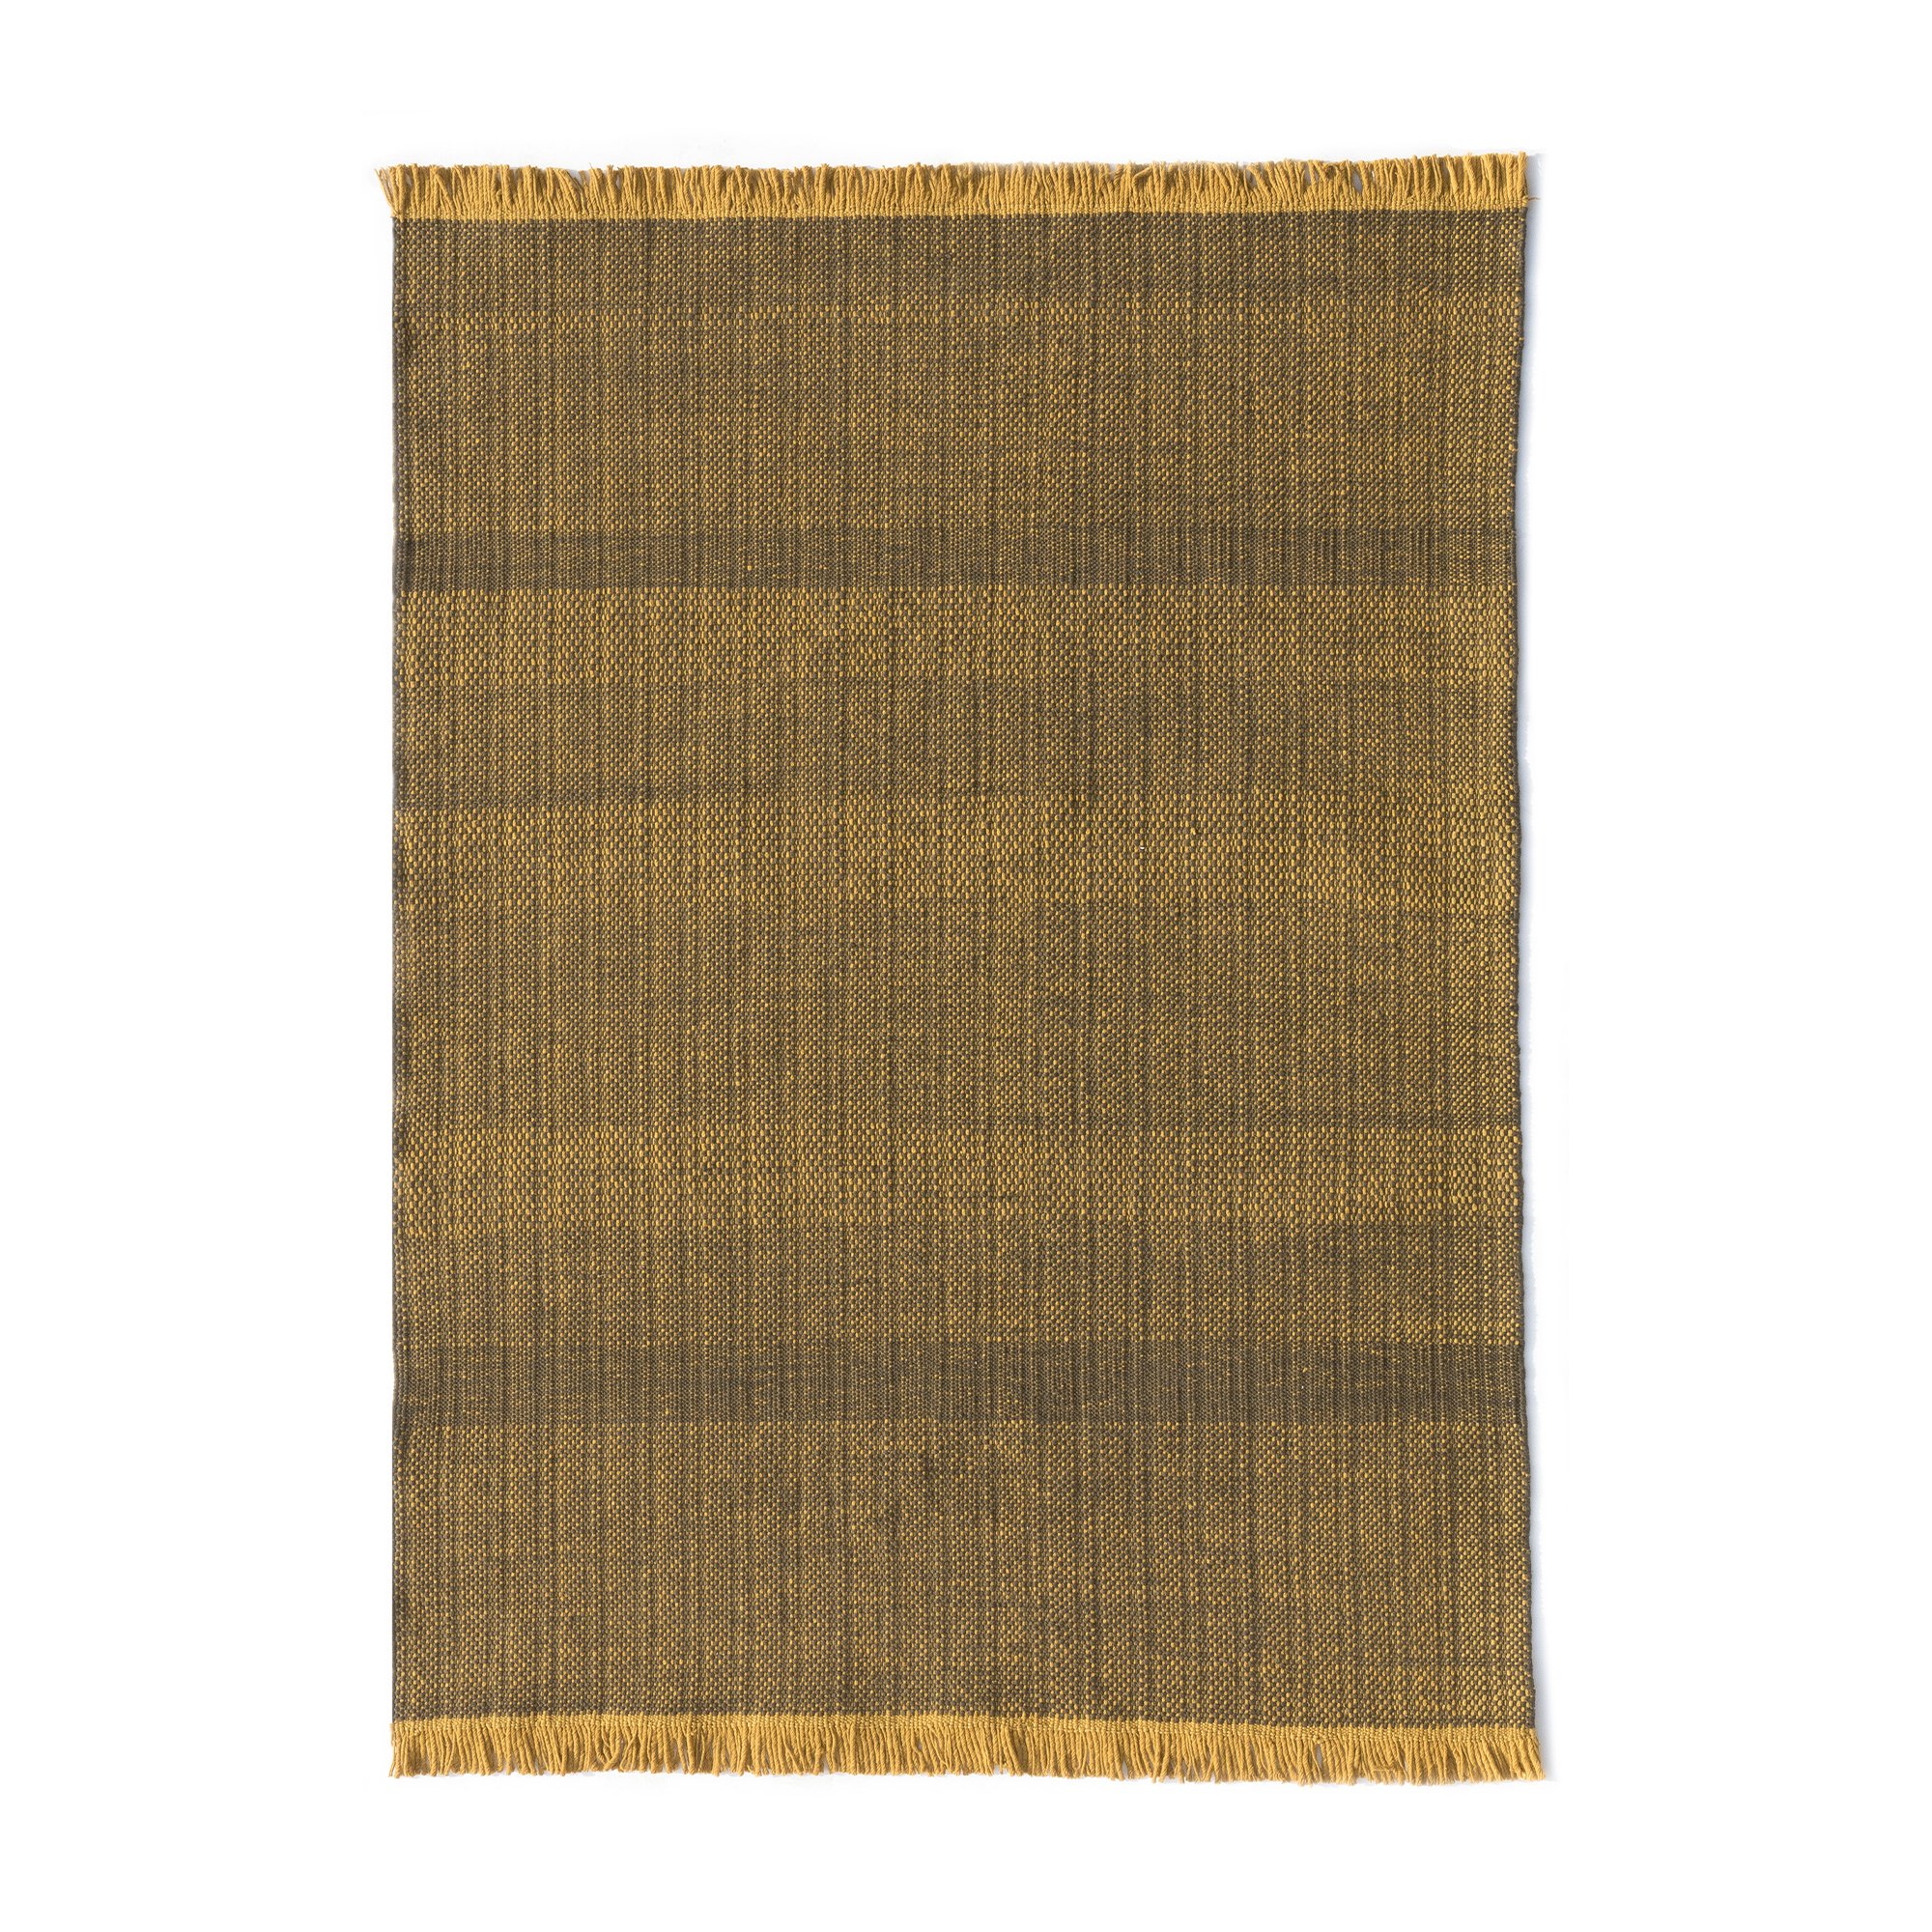 Tres Texture Outdoor Rug in Mustard 300cm x 400cm By nanimarquina